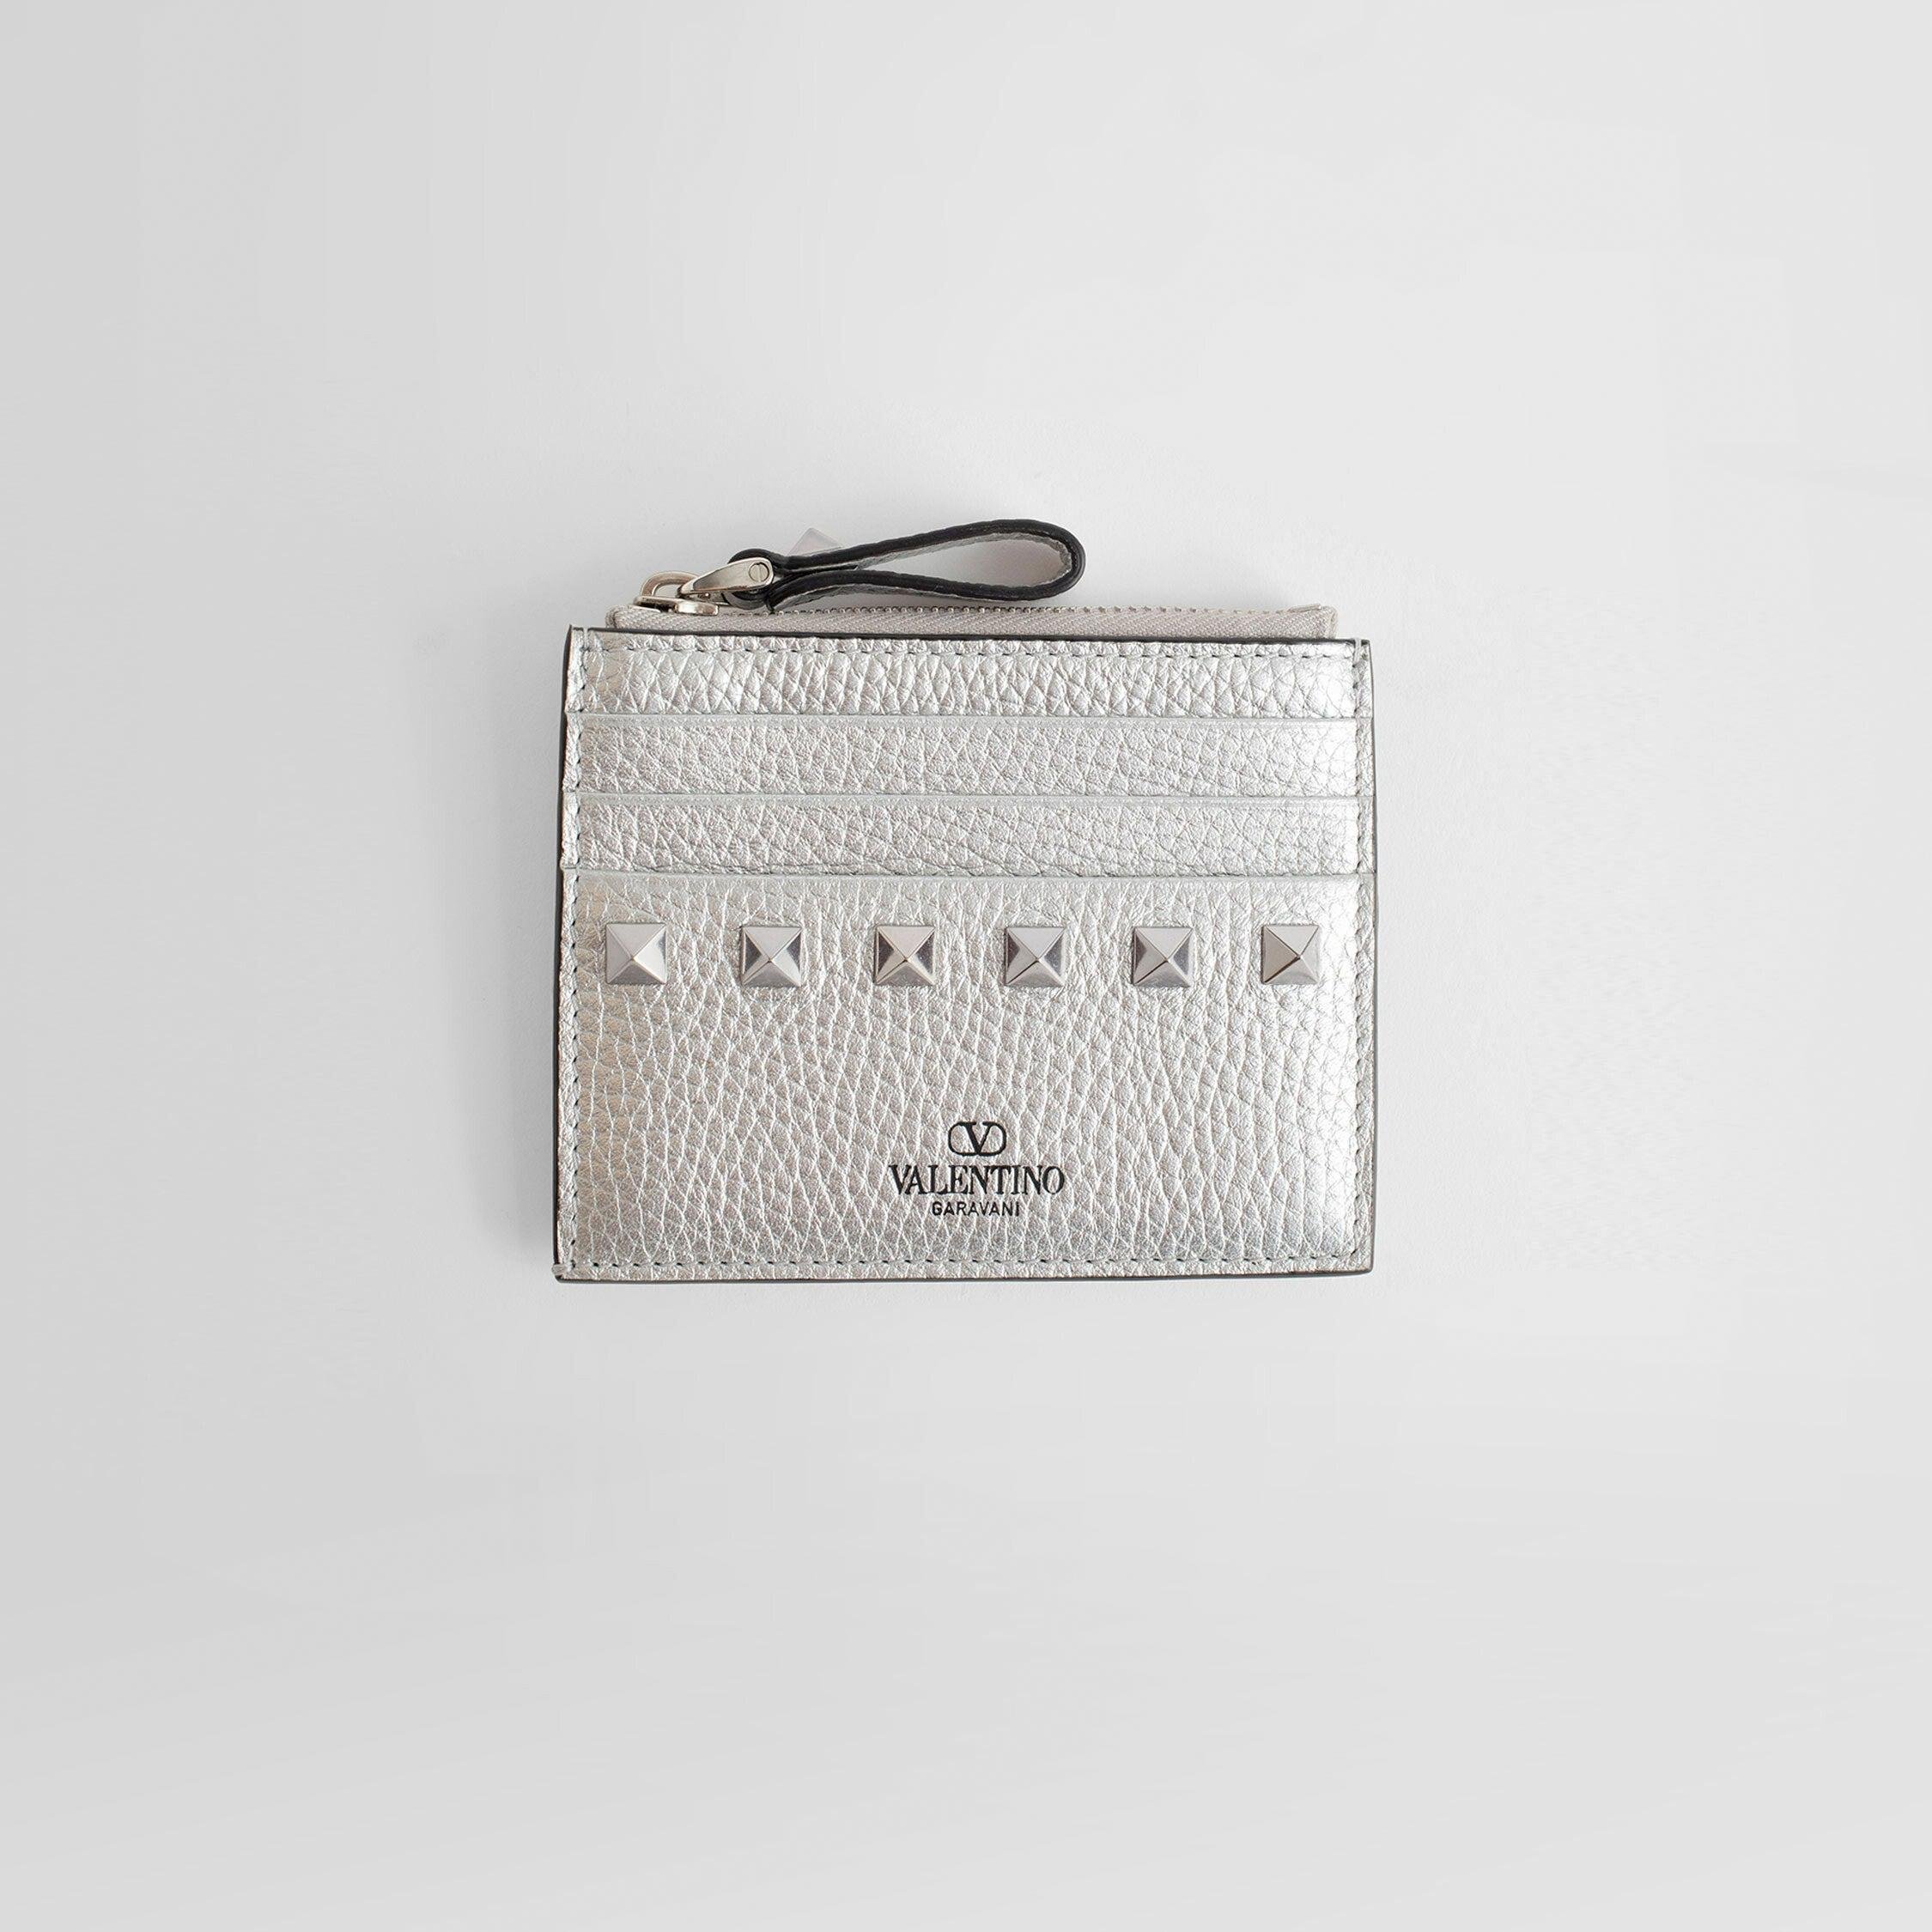 VALENTINO WOMAN SILVER WALLETS & CARDHOLDERS by VALENTINO